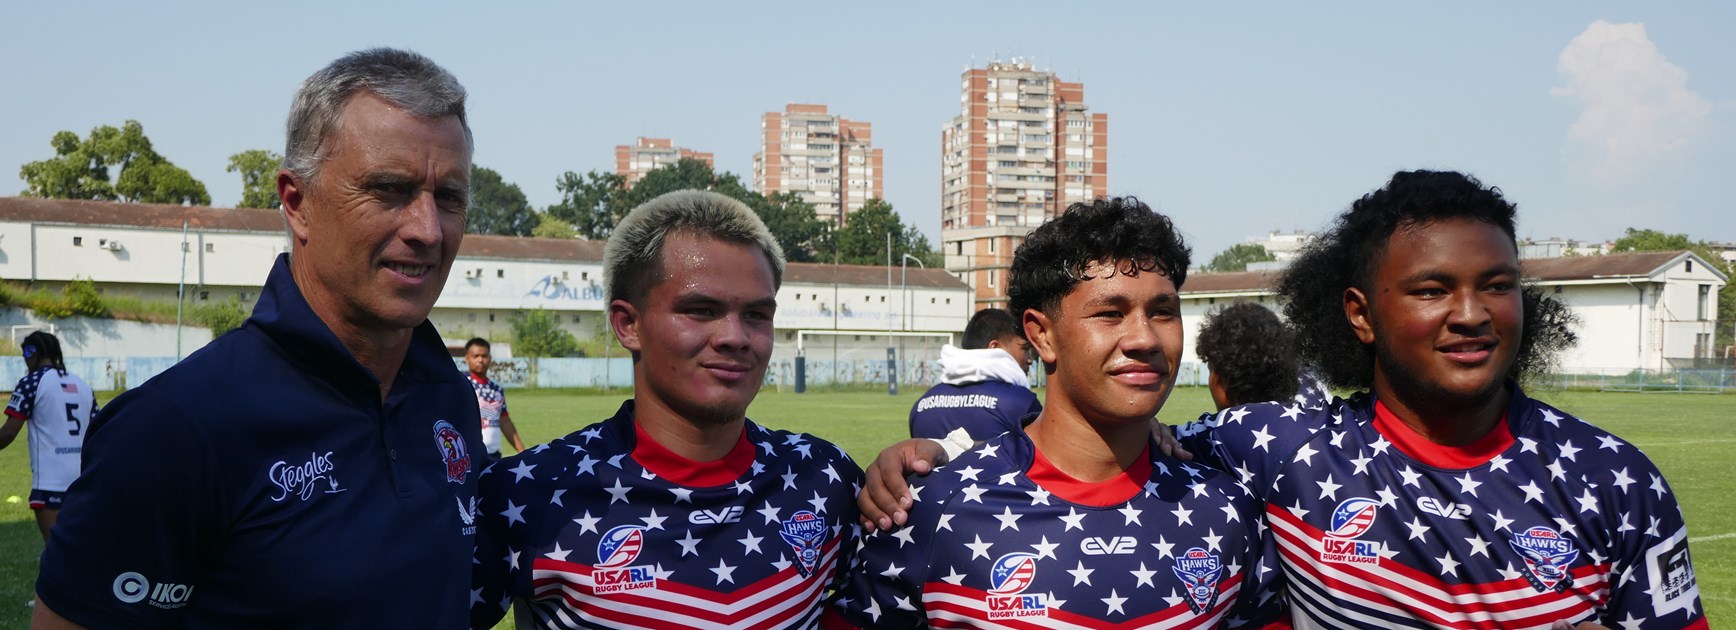 Sydney Roosters GM of football Craig Walker travelled to Belgrade to watch the USA youth team sponsored by the club make their international debut in the European U19s Championships.